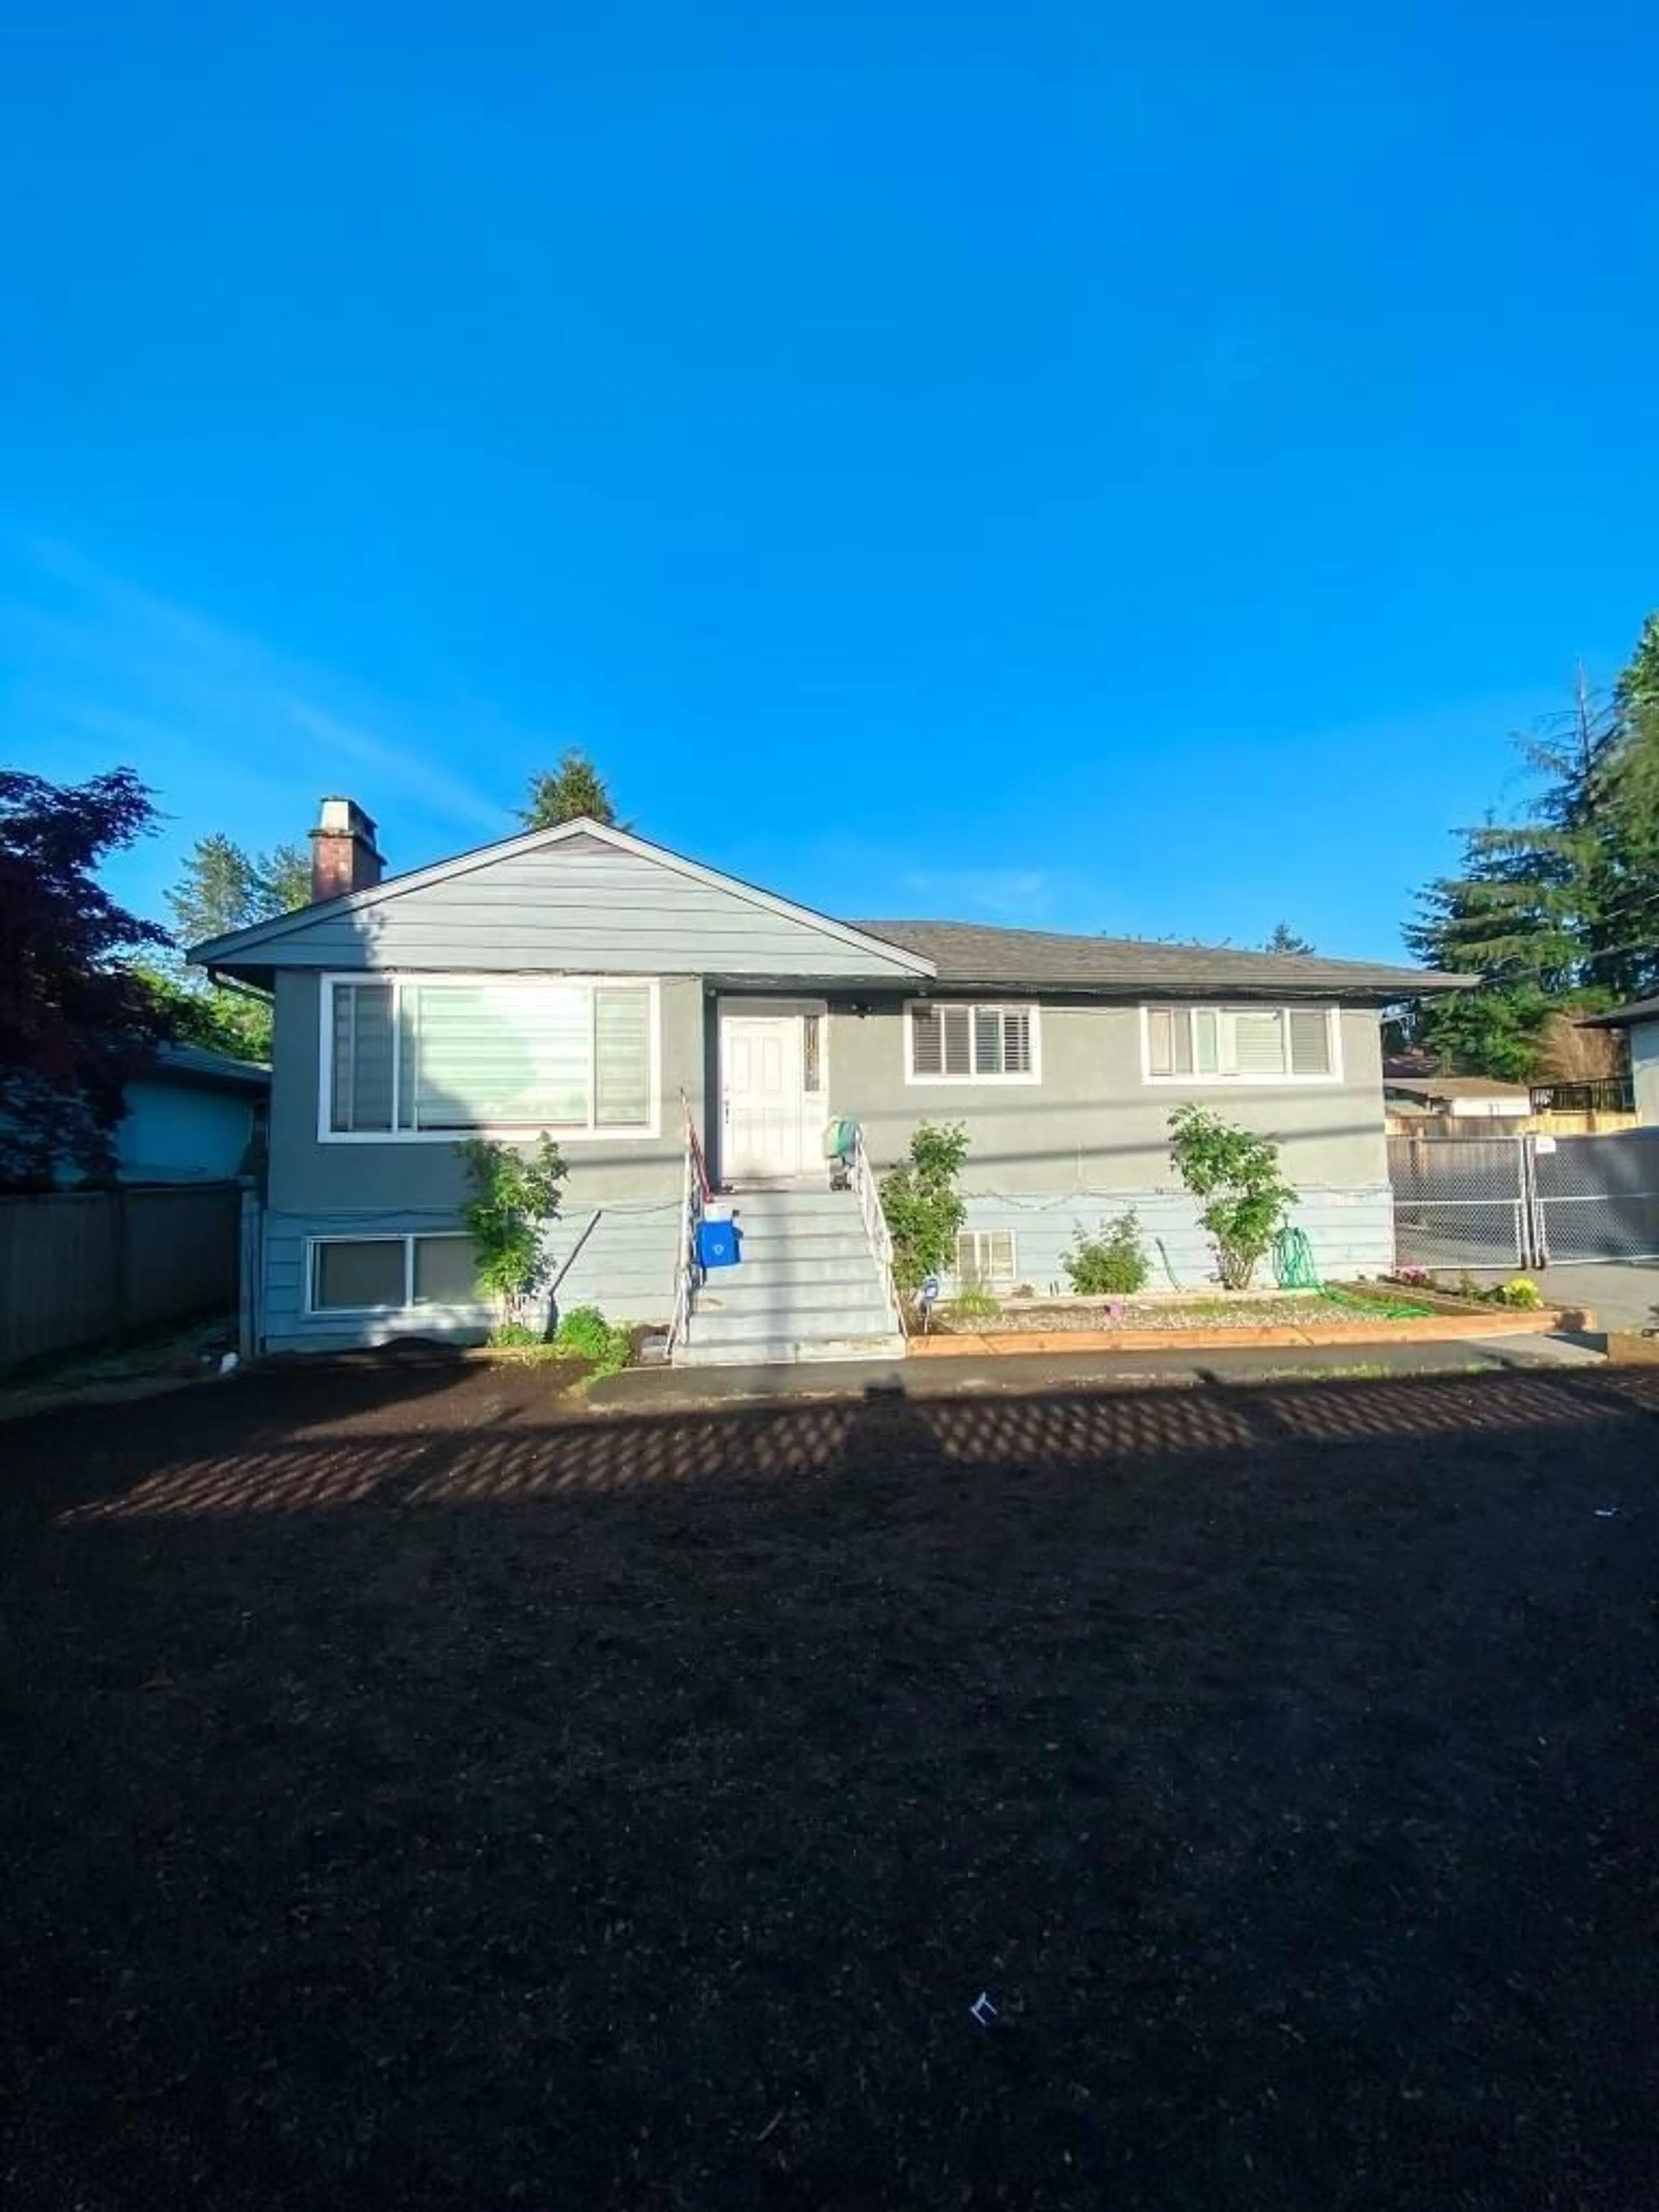 Frontside or backside of a home for 9864 128 STREET, Surrey British Columbia V3T2Y6